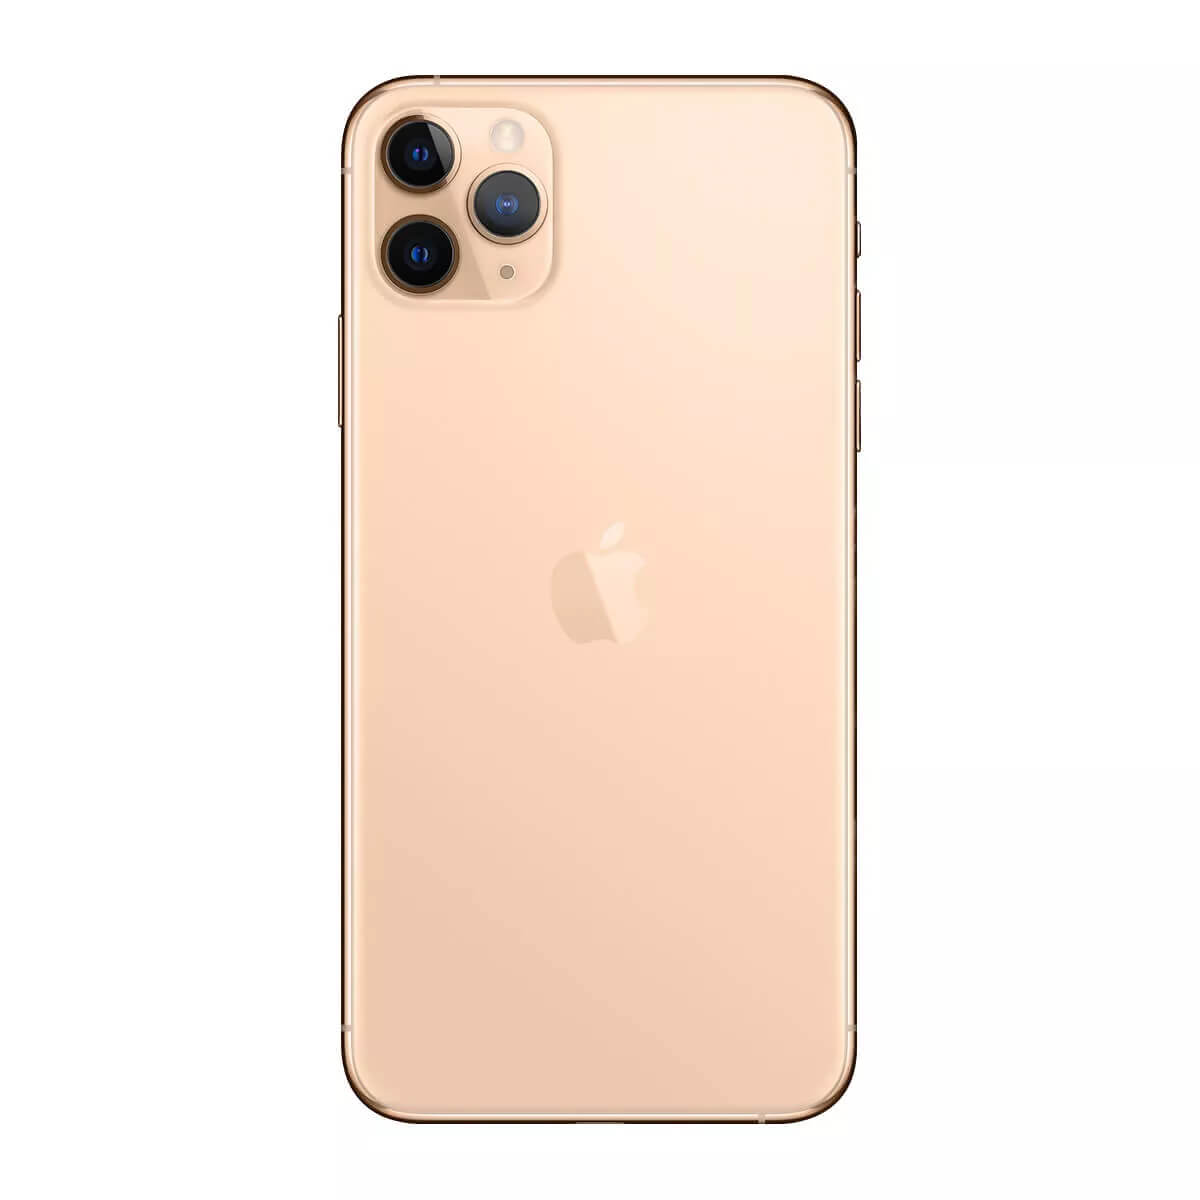 Non Active Apple iPhone 11 Pro Max 512GB - Gold